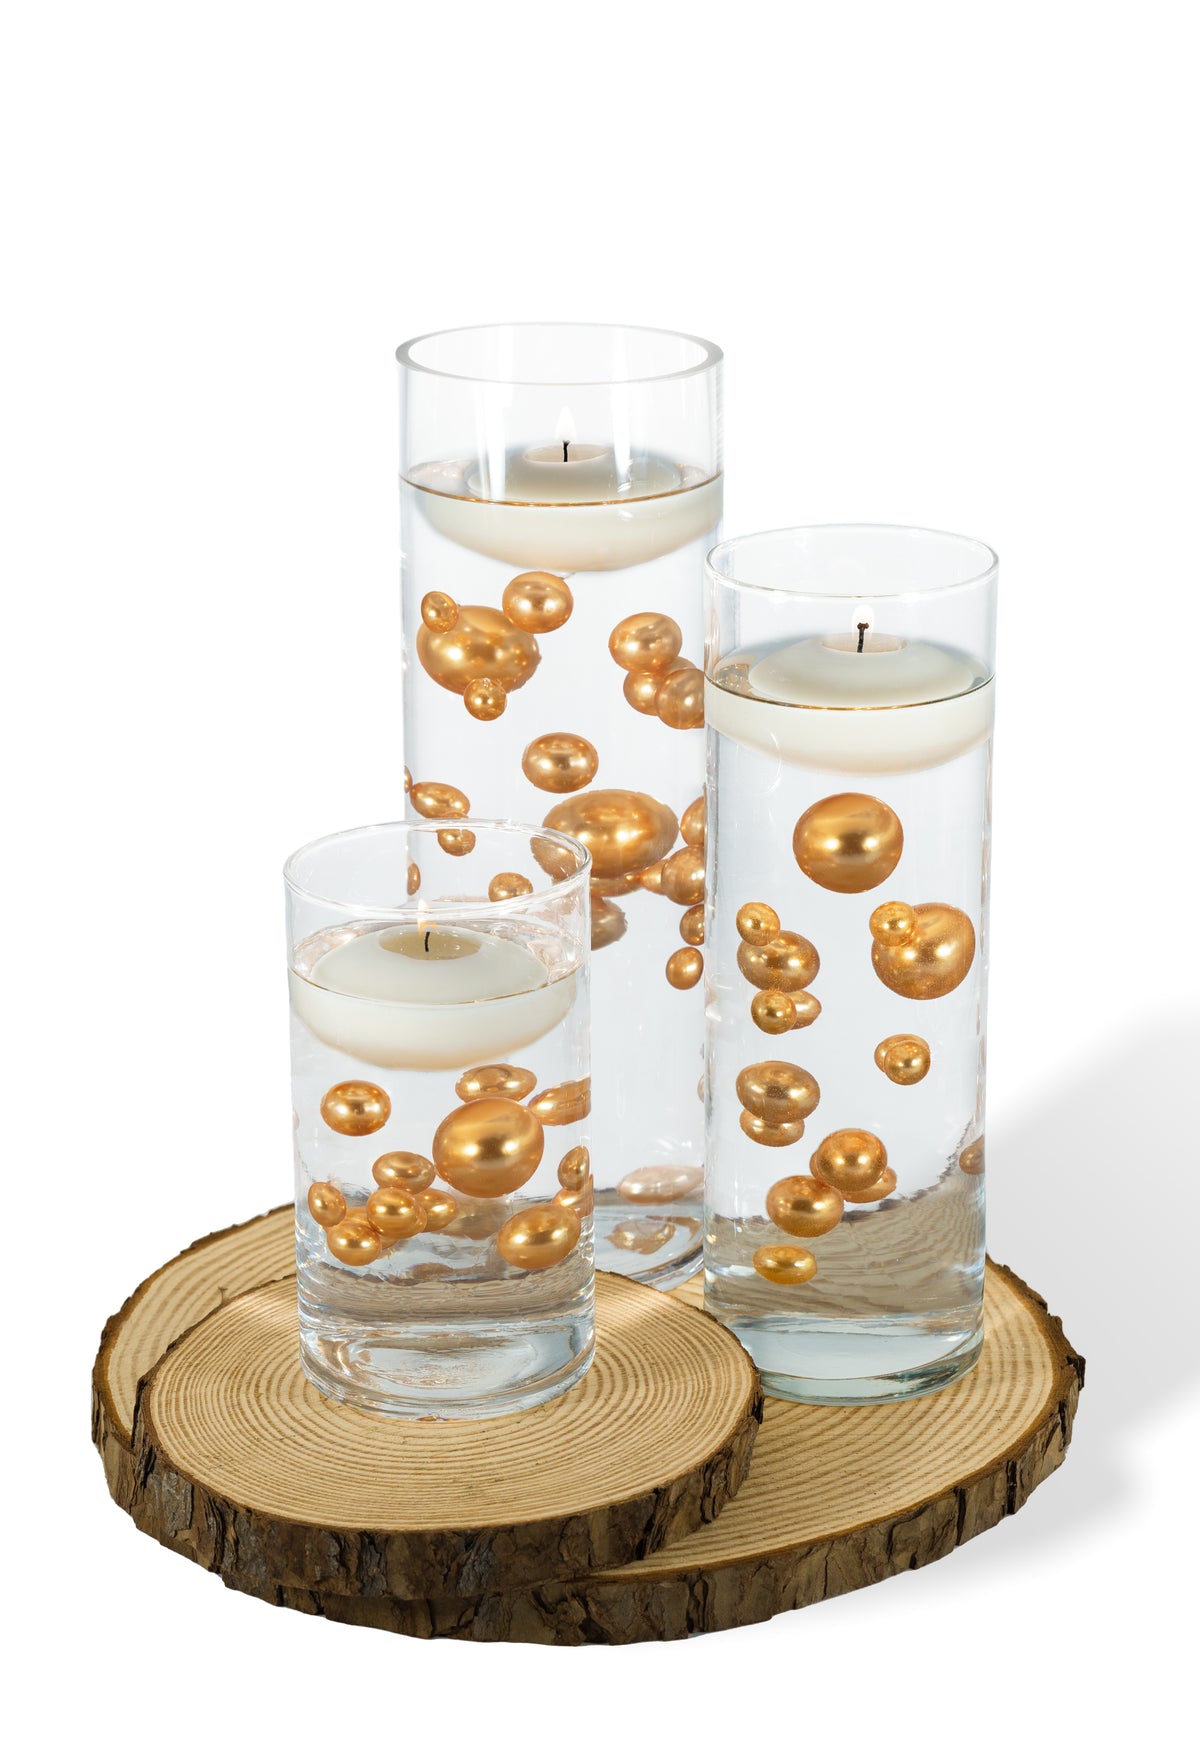 50 Floating Gold Pearls - Shiny - 1 Pk Fills 1 Gallon of Gels for Floating Effect - With Measured Gels Kit - Option 3 Fairy Lights - Vase Decorations